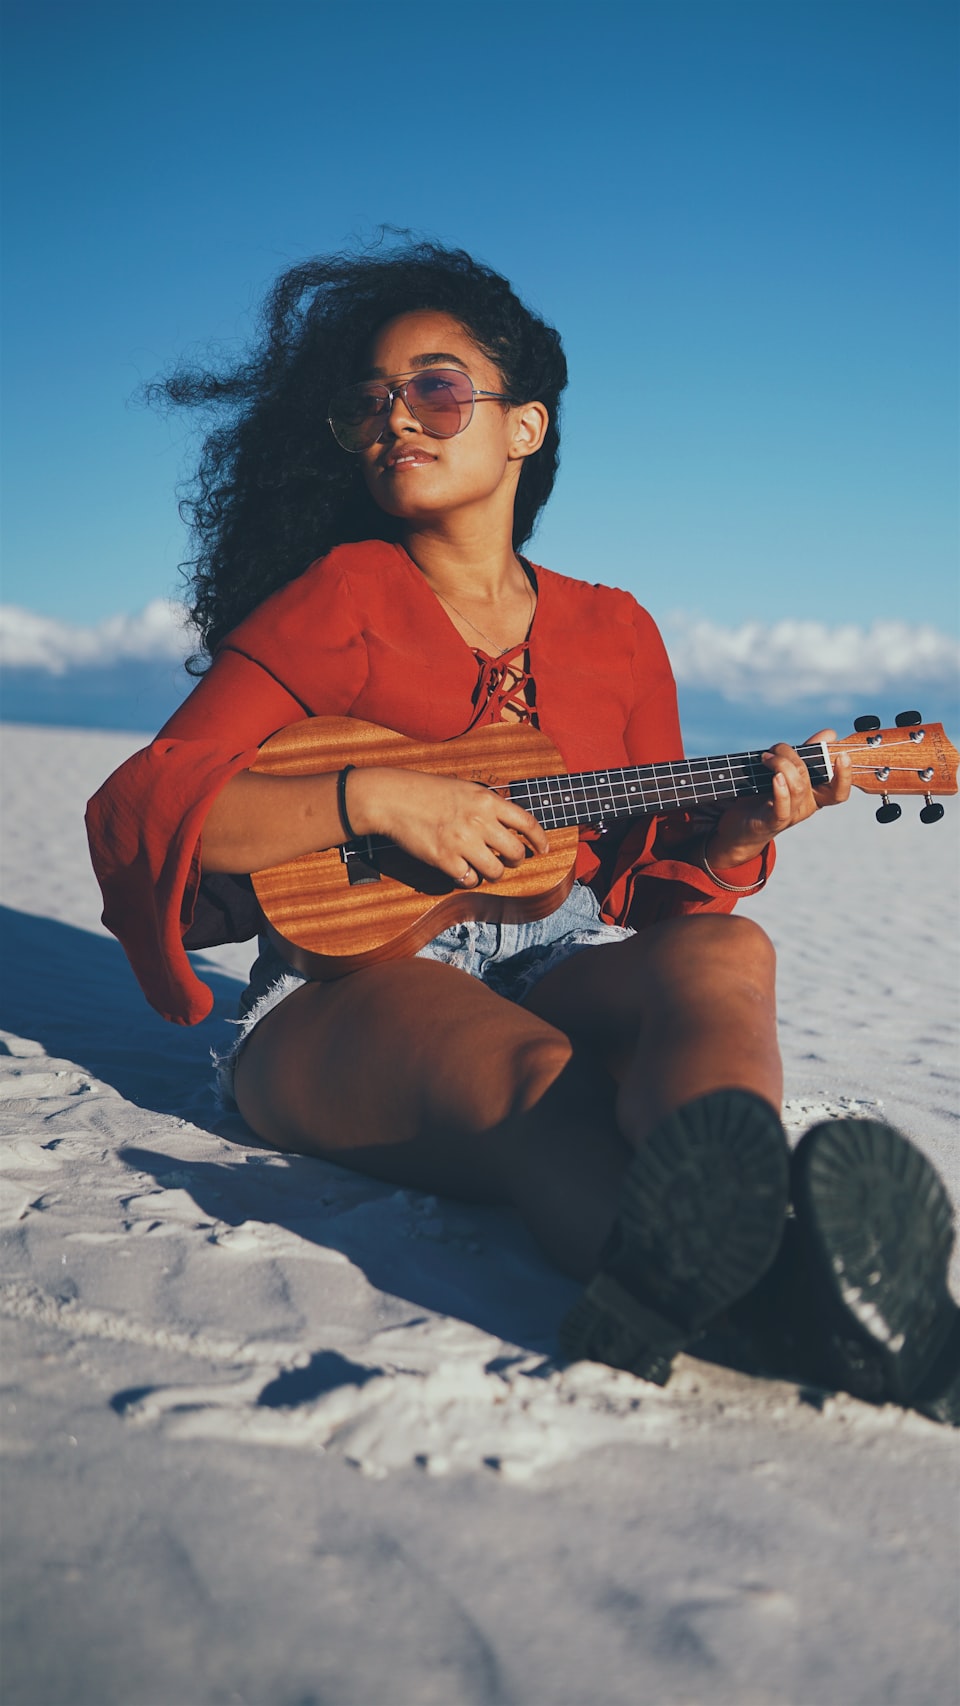 A beginners guide to playing the ukulele left-handed